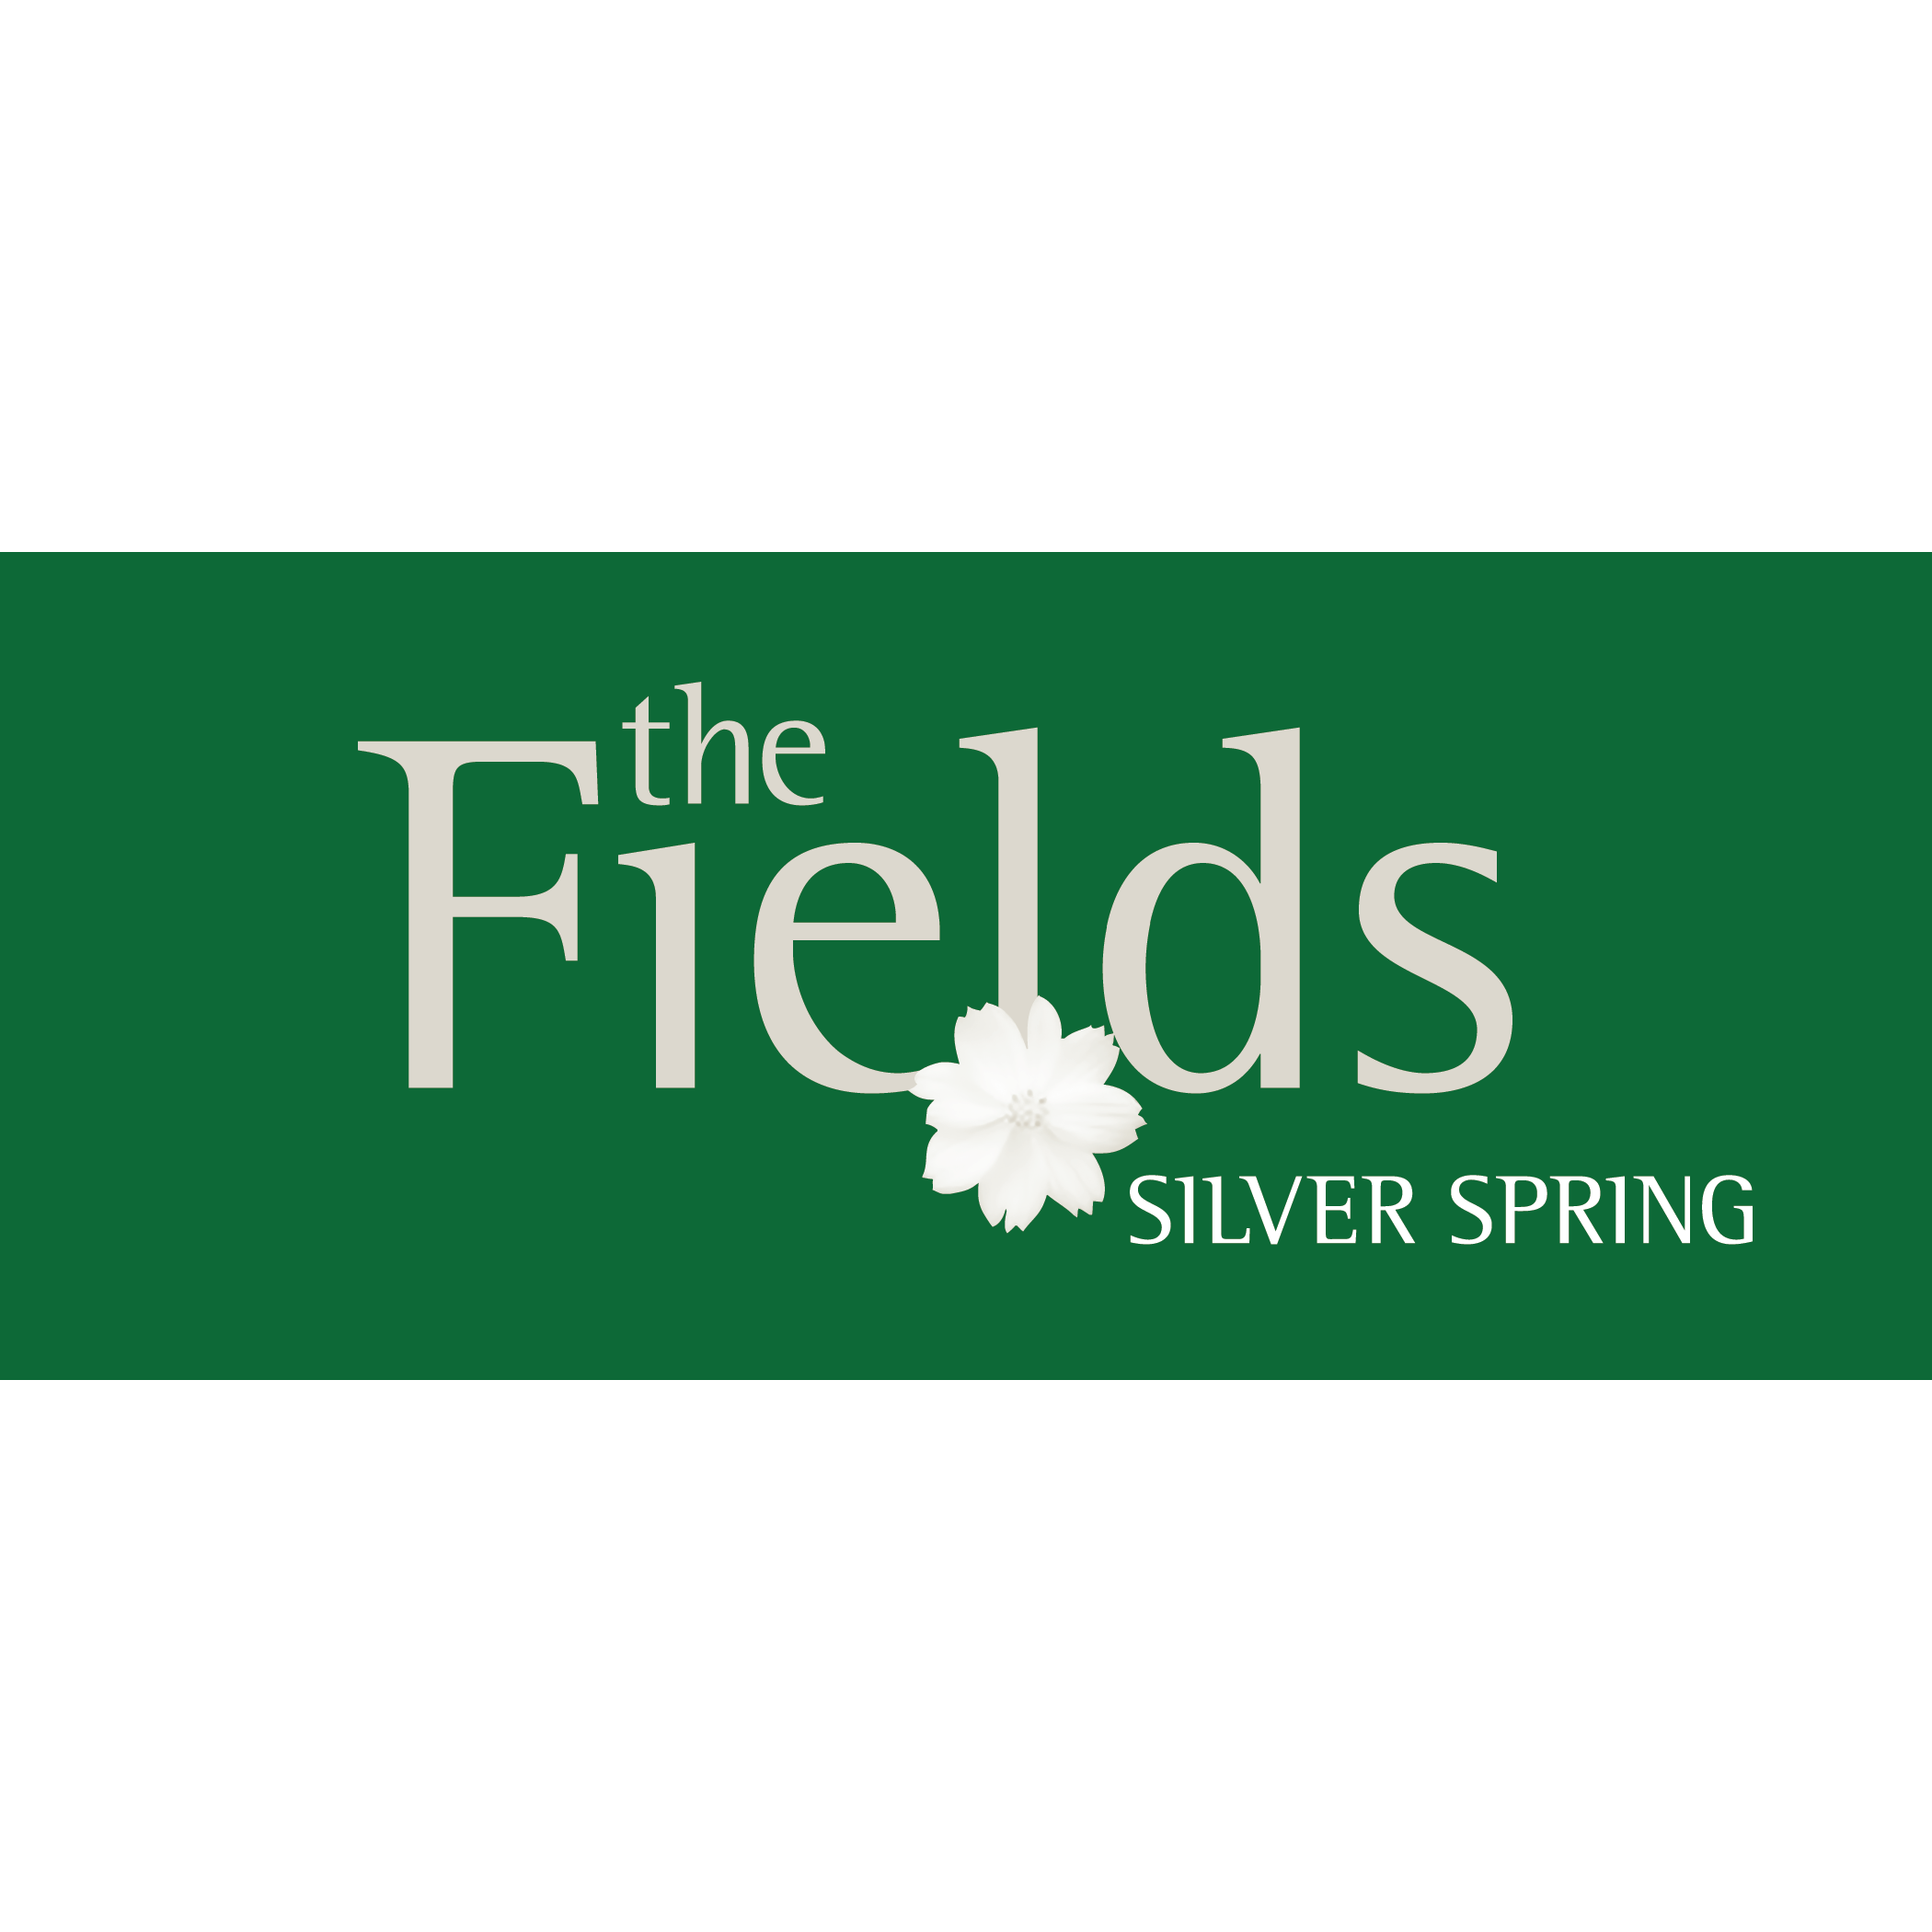 The Fields of Silver Spring